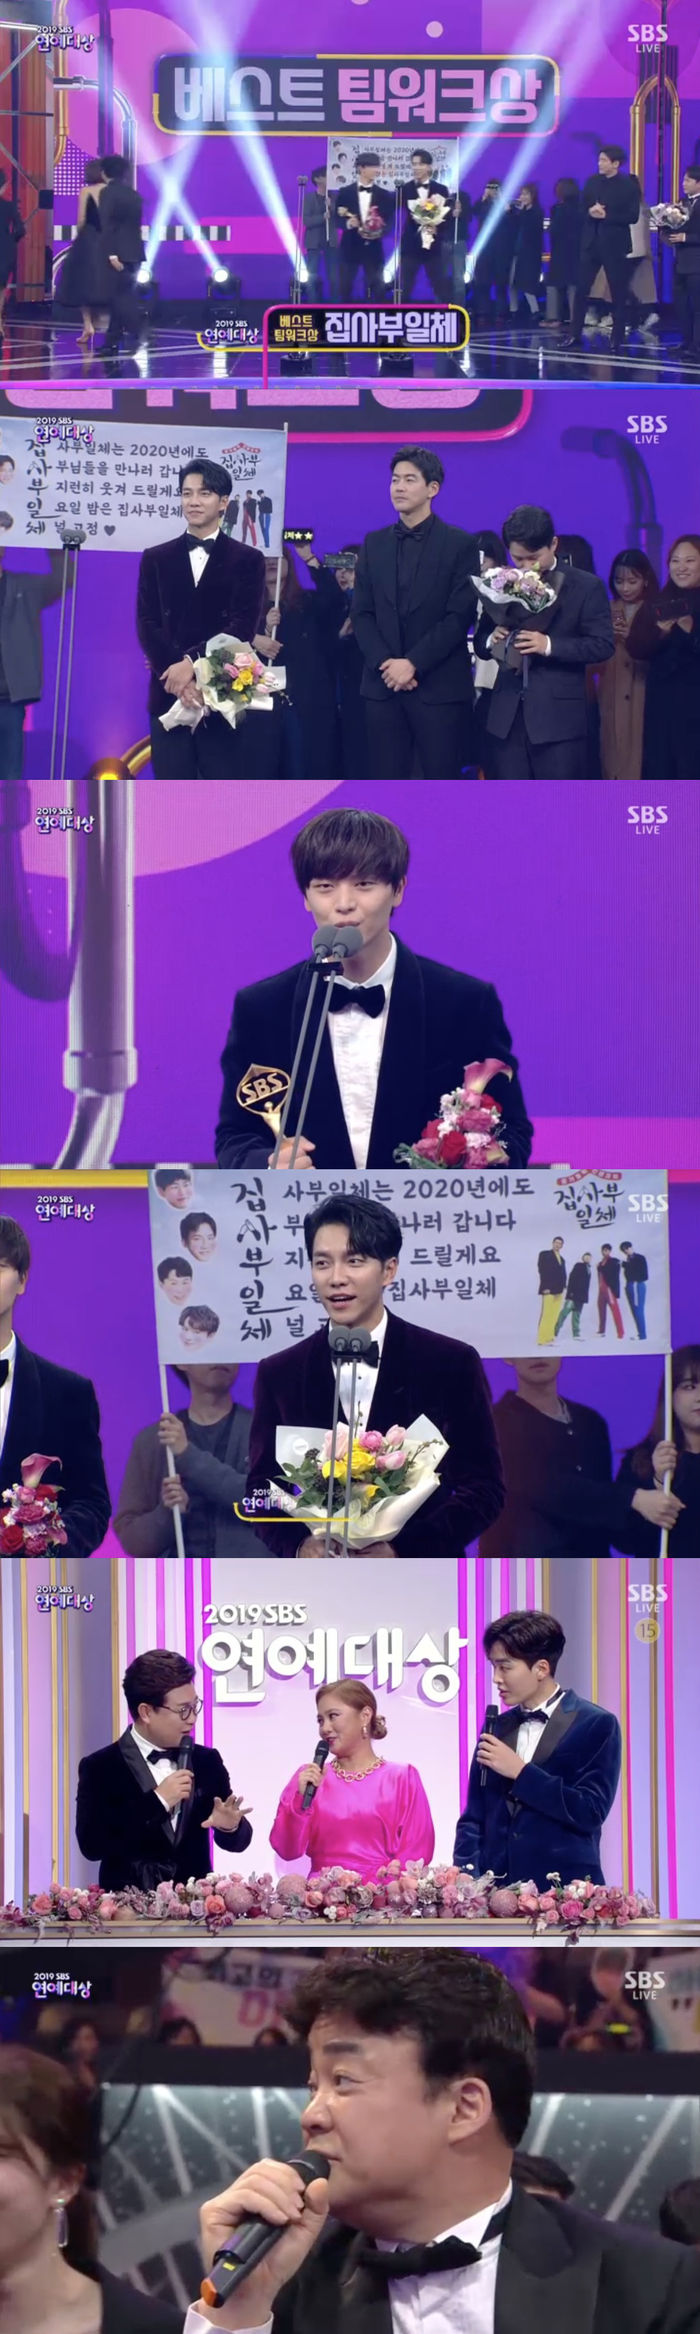 The All The Butlers team won the Best Teamwork Award.The 2019 SBS Entertainment Grand Prize, which was broadcast live from 9 pm at SBS Prism Tower in Sangam-dong, Mapo-gu, Seoul, opened a spectacular show with Kim Seong-joo, Park Na-rae and Cho Jung-sik.Yook Sungjae, the youngest of All The Butlers, who won the Best Teamwork Award on the day, expressed his feelings as a representative.Its been almost two years, said Yook Sungjae.In fact, I am sorry that the members of the rising brothers are so loving and powerful as the youngest, but I am sorry that I can not get rid of them. I met many masters, but the best masters seem to be the brothers who program together.Lee Seung-gi said, There is actually good news. From next year, one more team member will come in and will be a new rising figure and will greet you. Kim Seong-jooo, who watched their awards, said, In fact, the alley restaurant team is a teamwork team that has been made up of dinner.Baek Jong-won also said, Our teamwork is better. I am sorry that this award was greedy.I feel a little bit like that, he said. We have a lot of dinner, but there are more. 